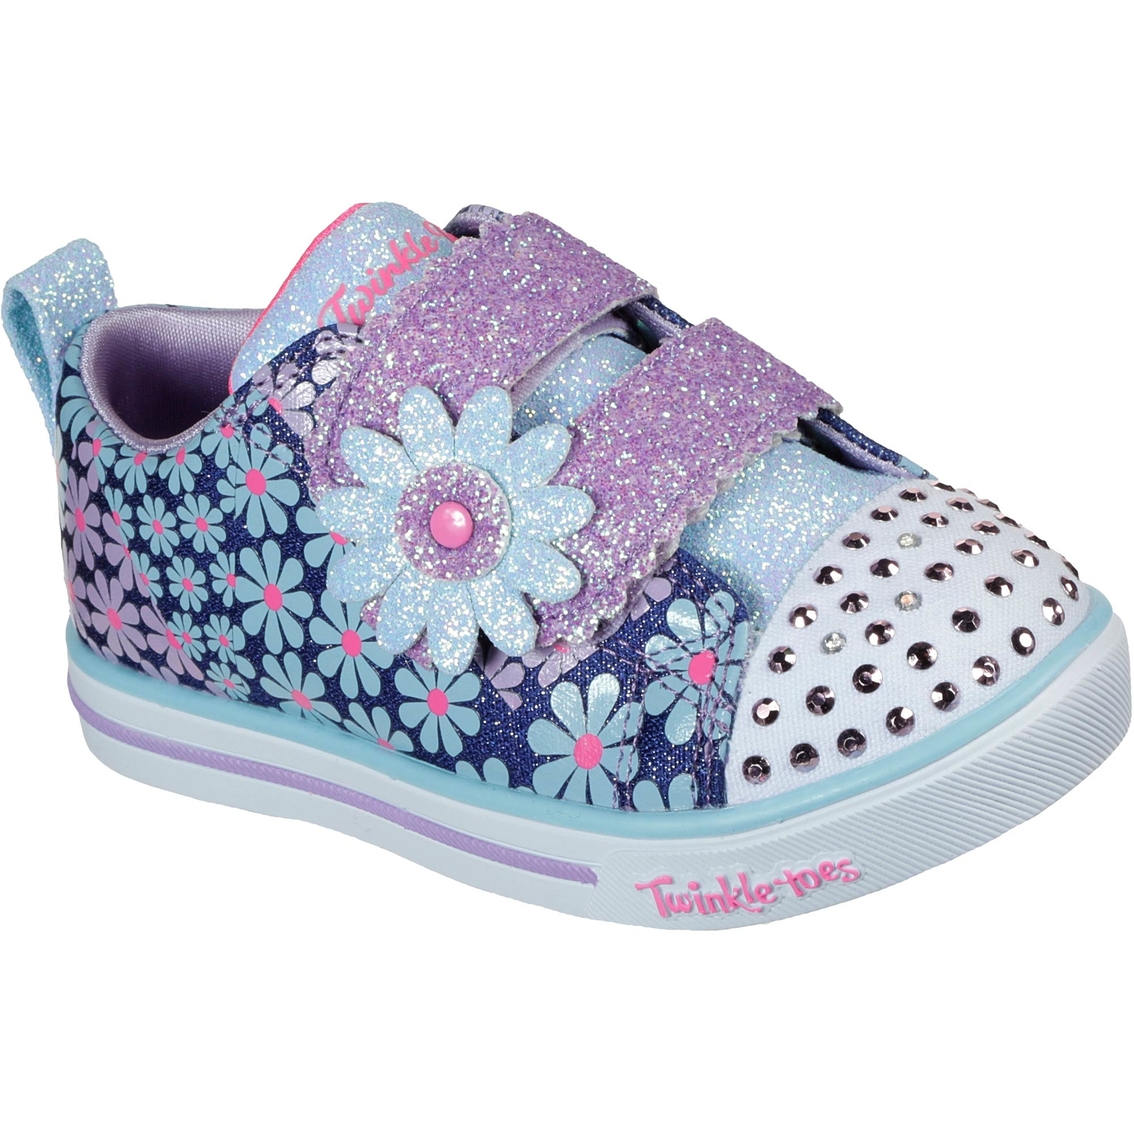 skechers childrens shoes twinkle toes